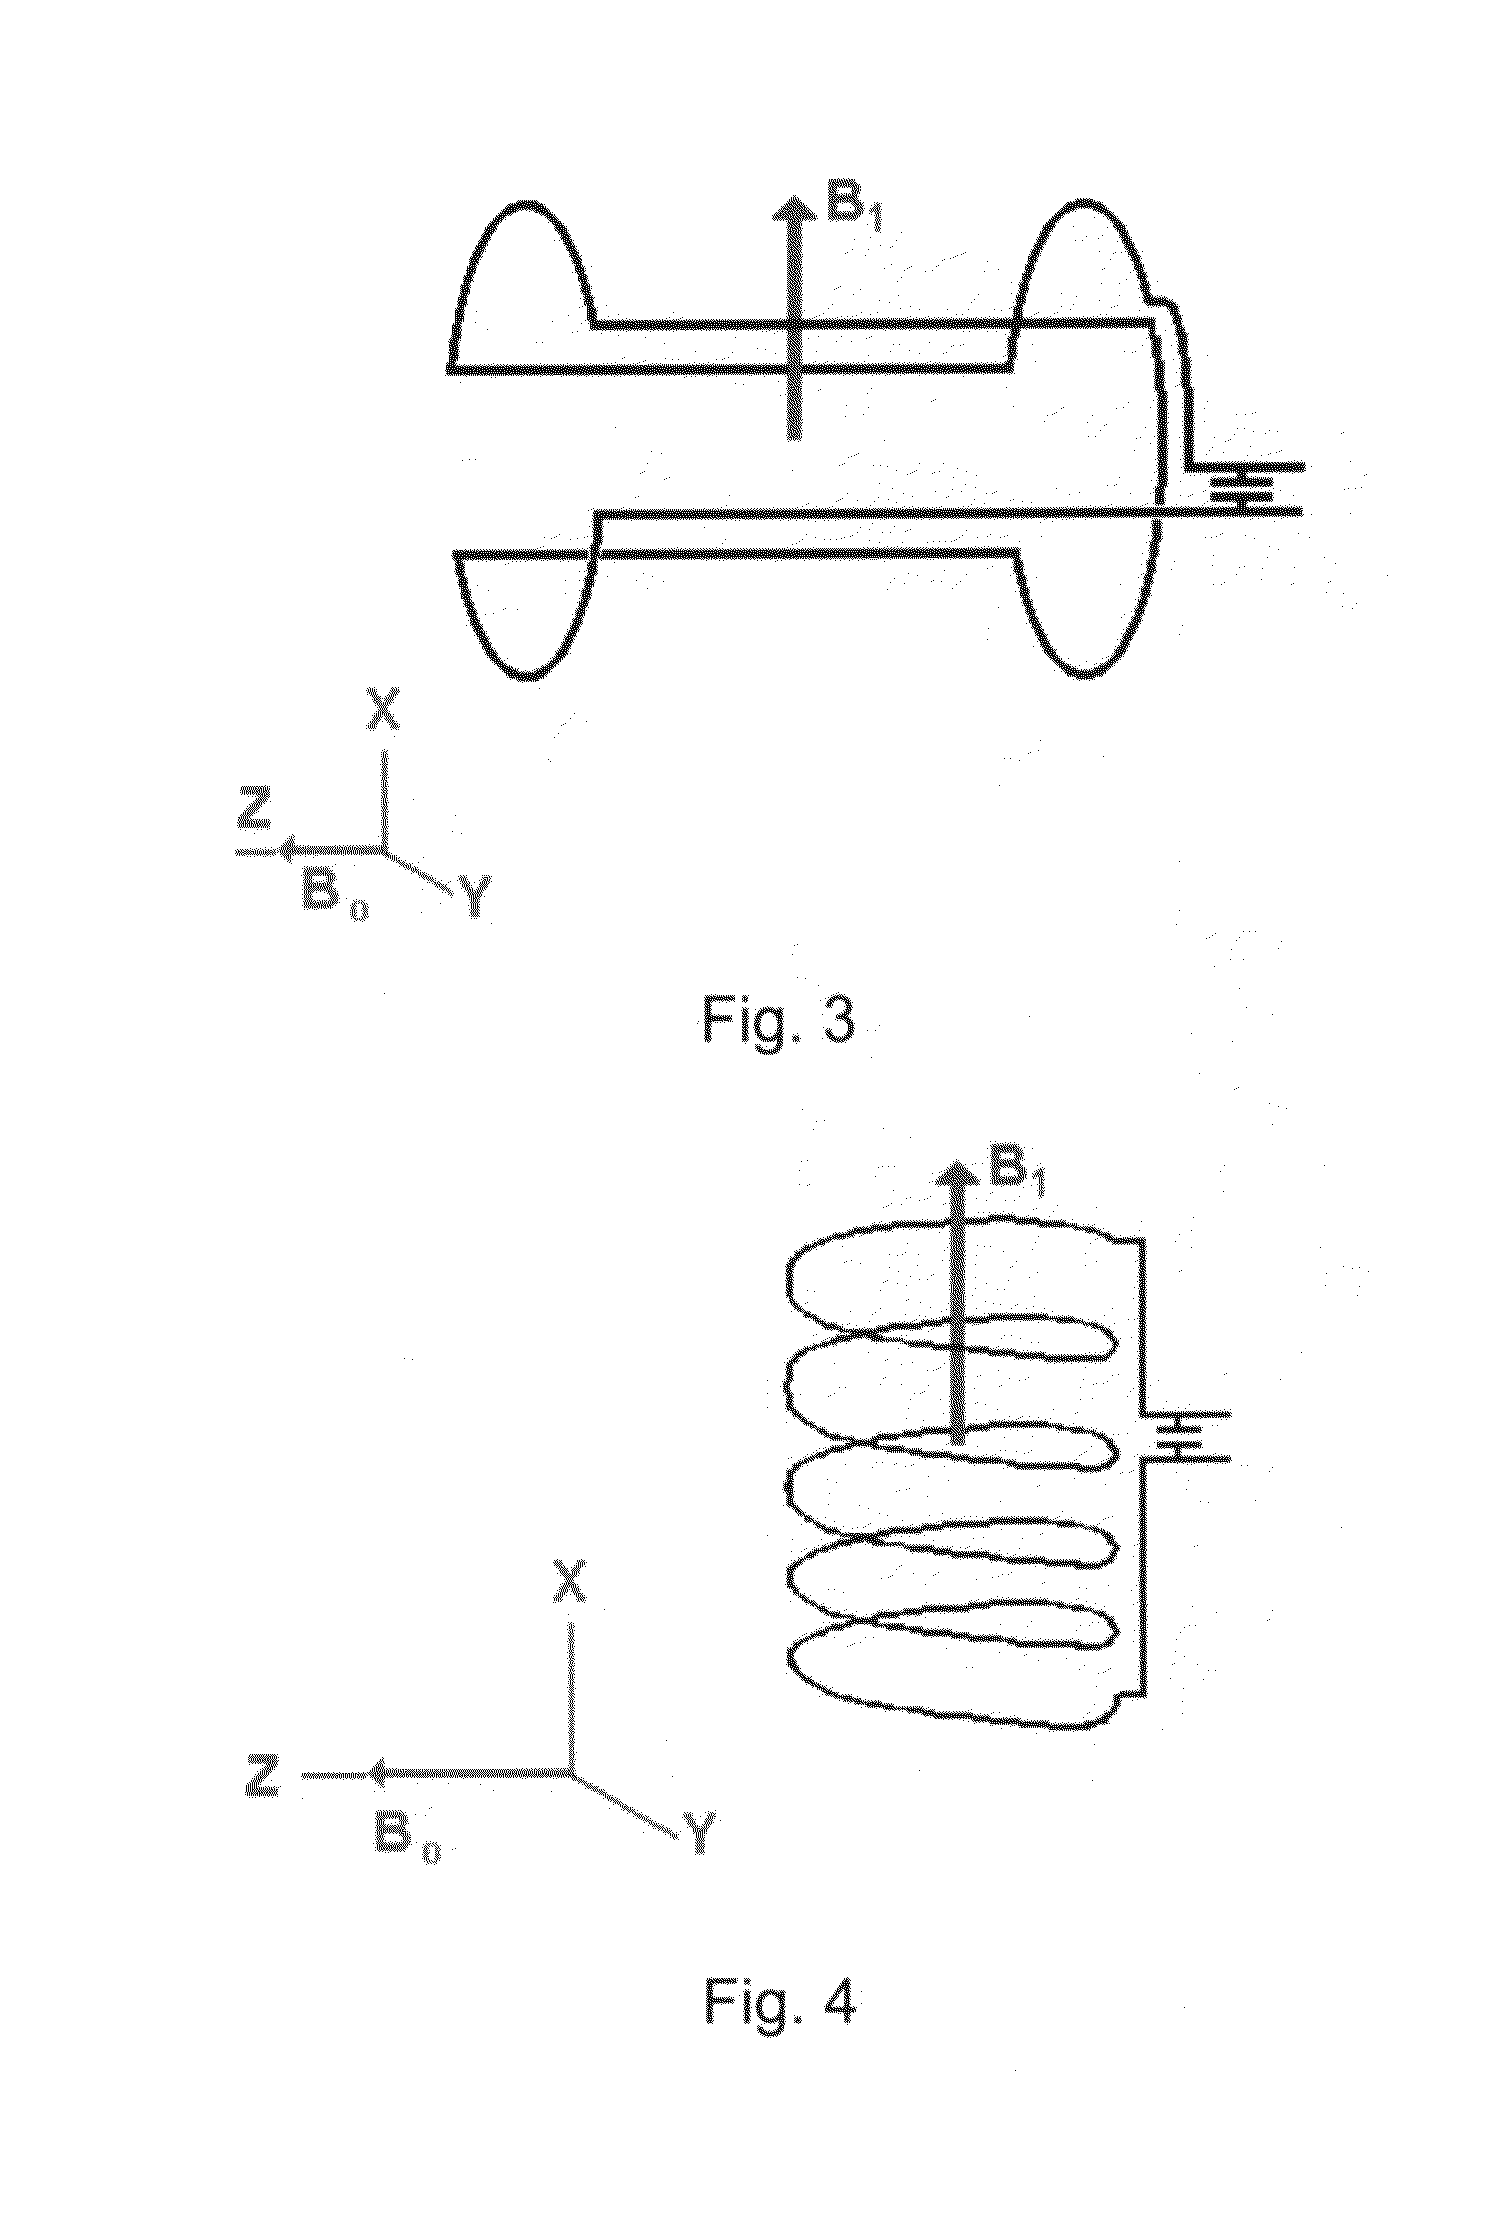 Radiofrequency magnetic field resonator and a method of designing the same